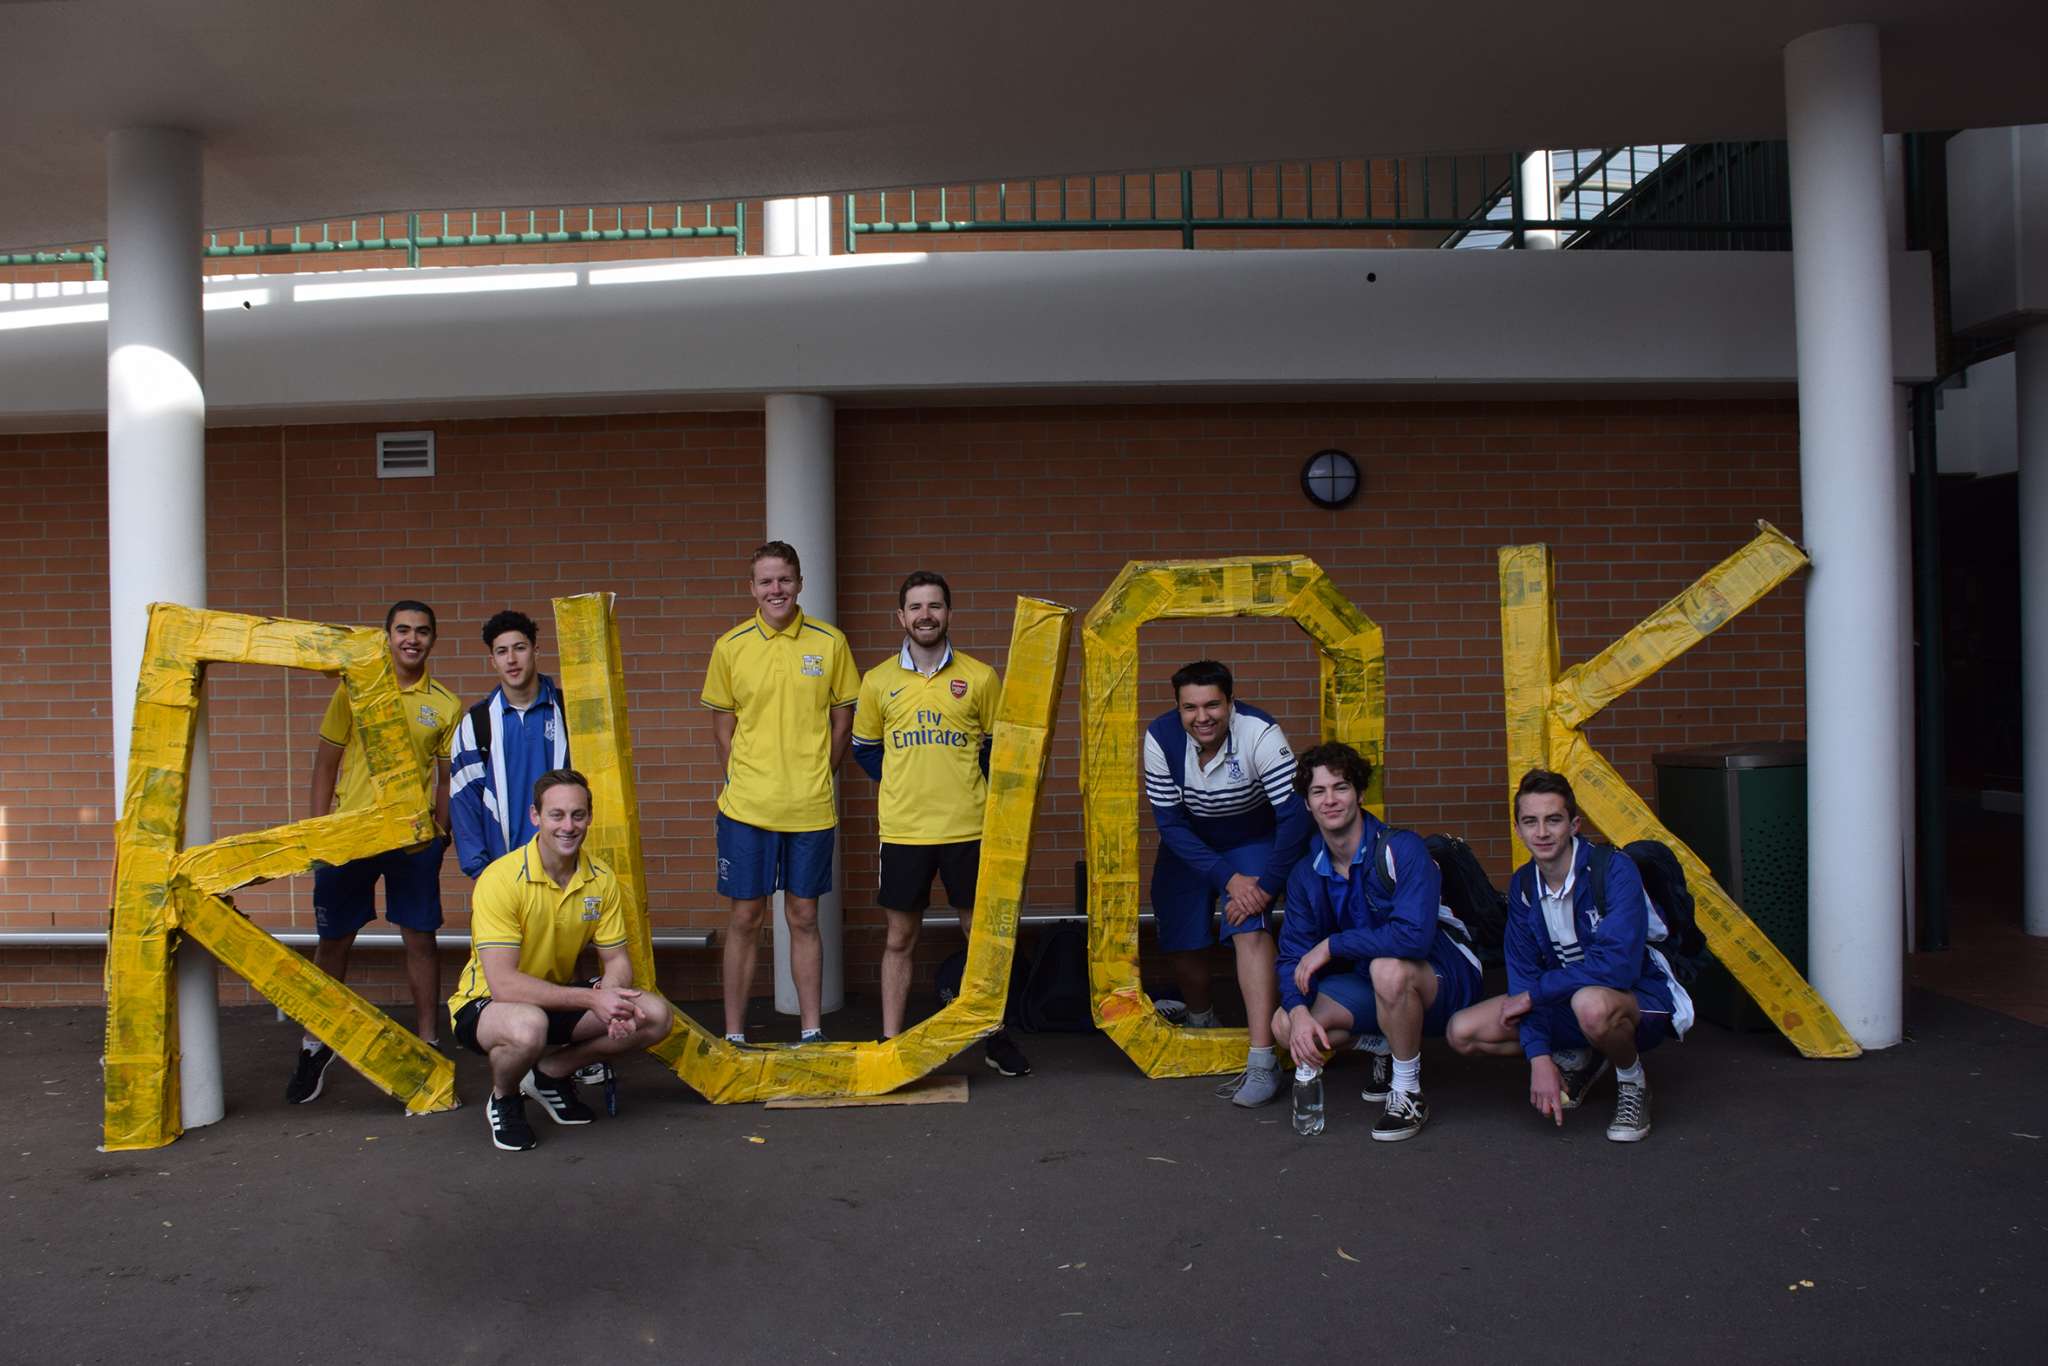 RUOK? Day - St Dominic's College